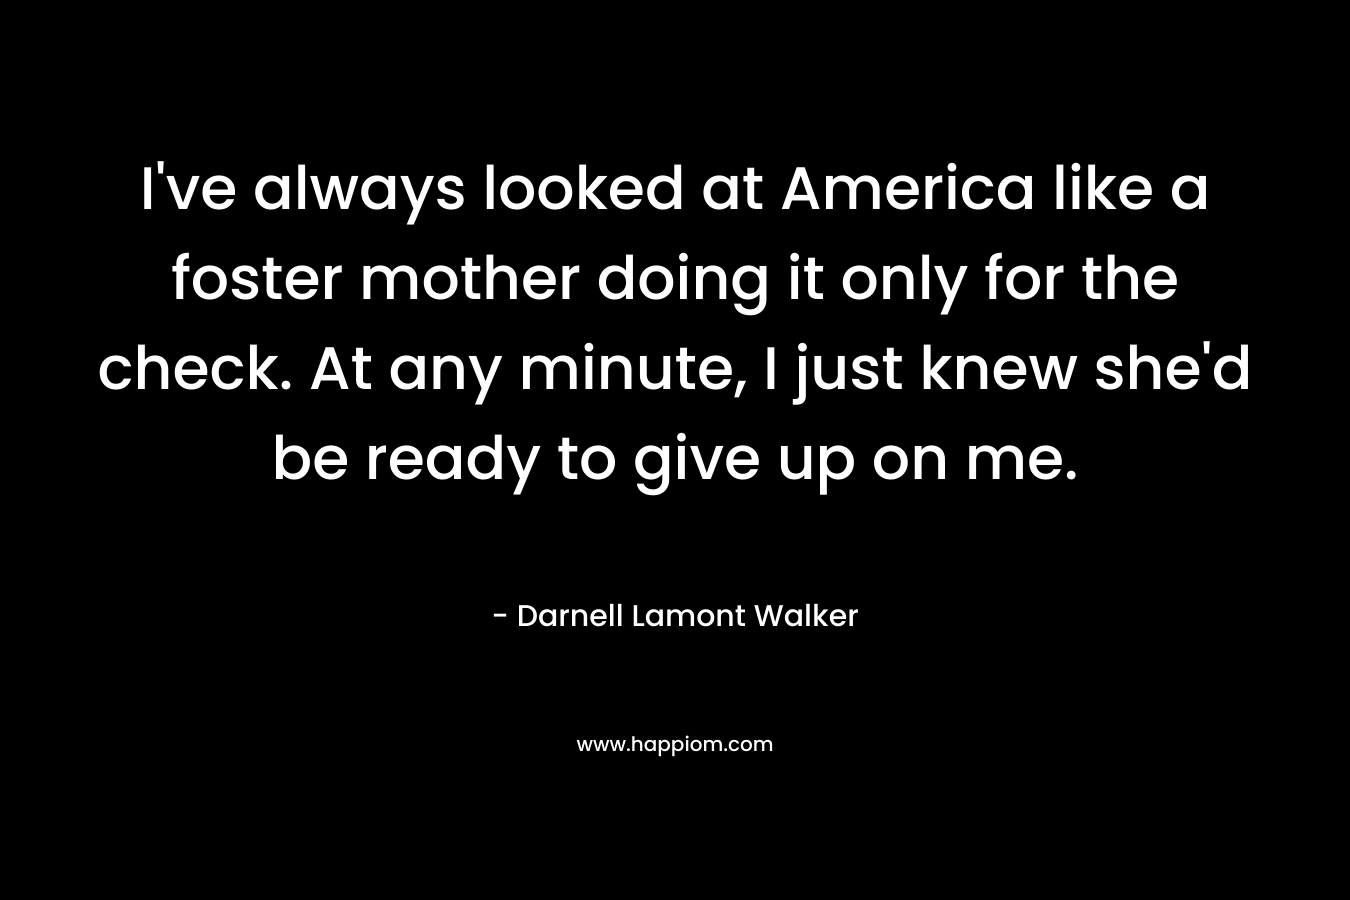 I've always looked at America like a foster mother doing it only for the check. At any minute, I just knew she'd be ready to give up on me.